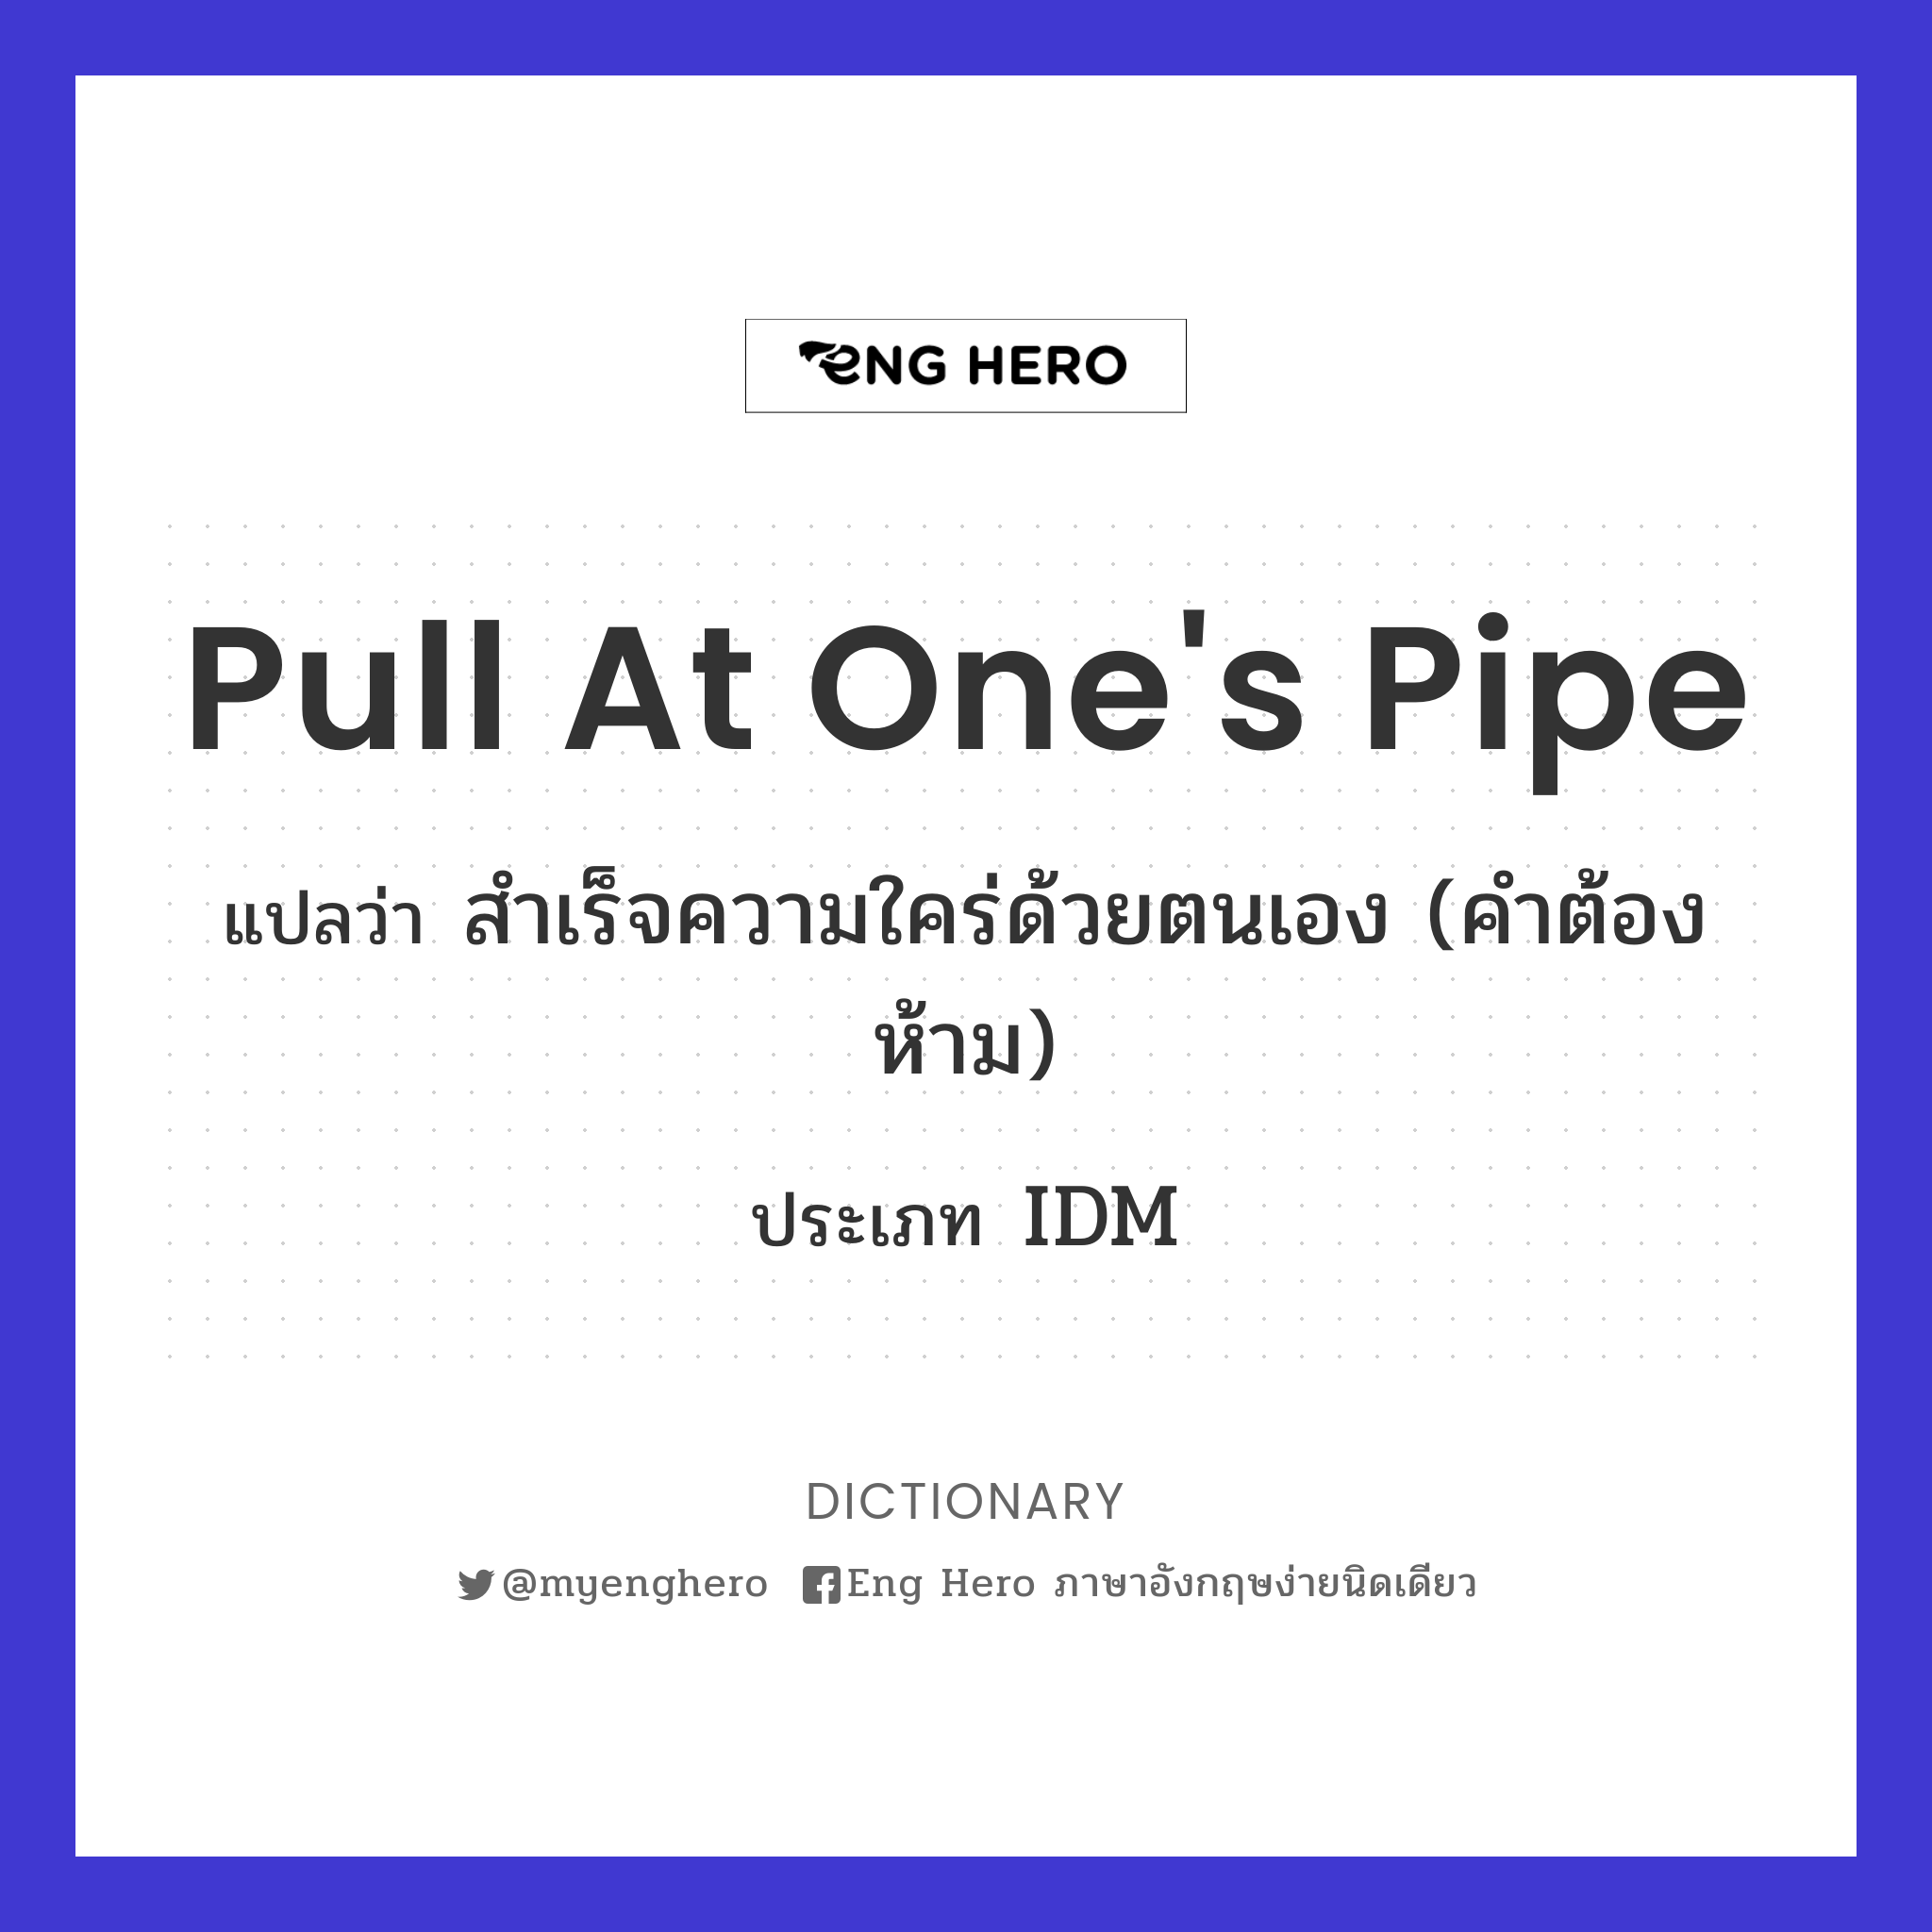 pull at one's pipe